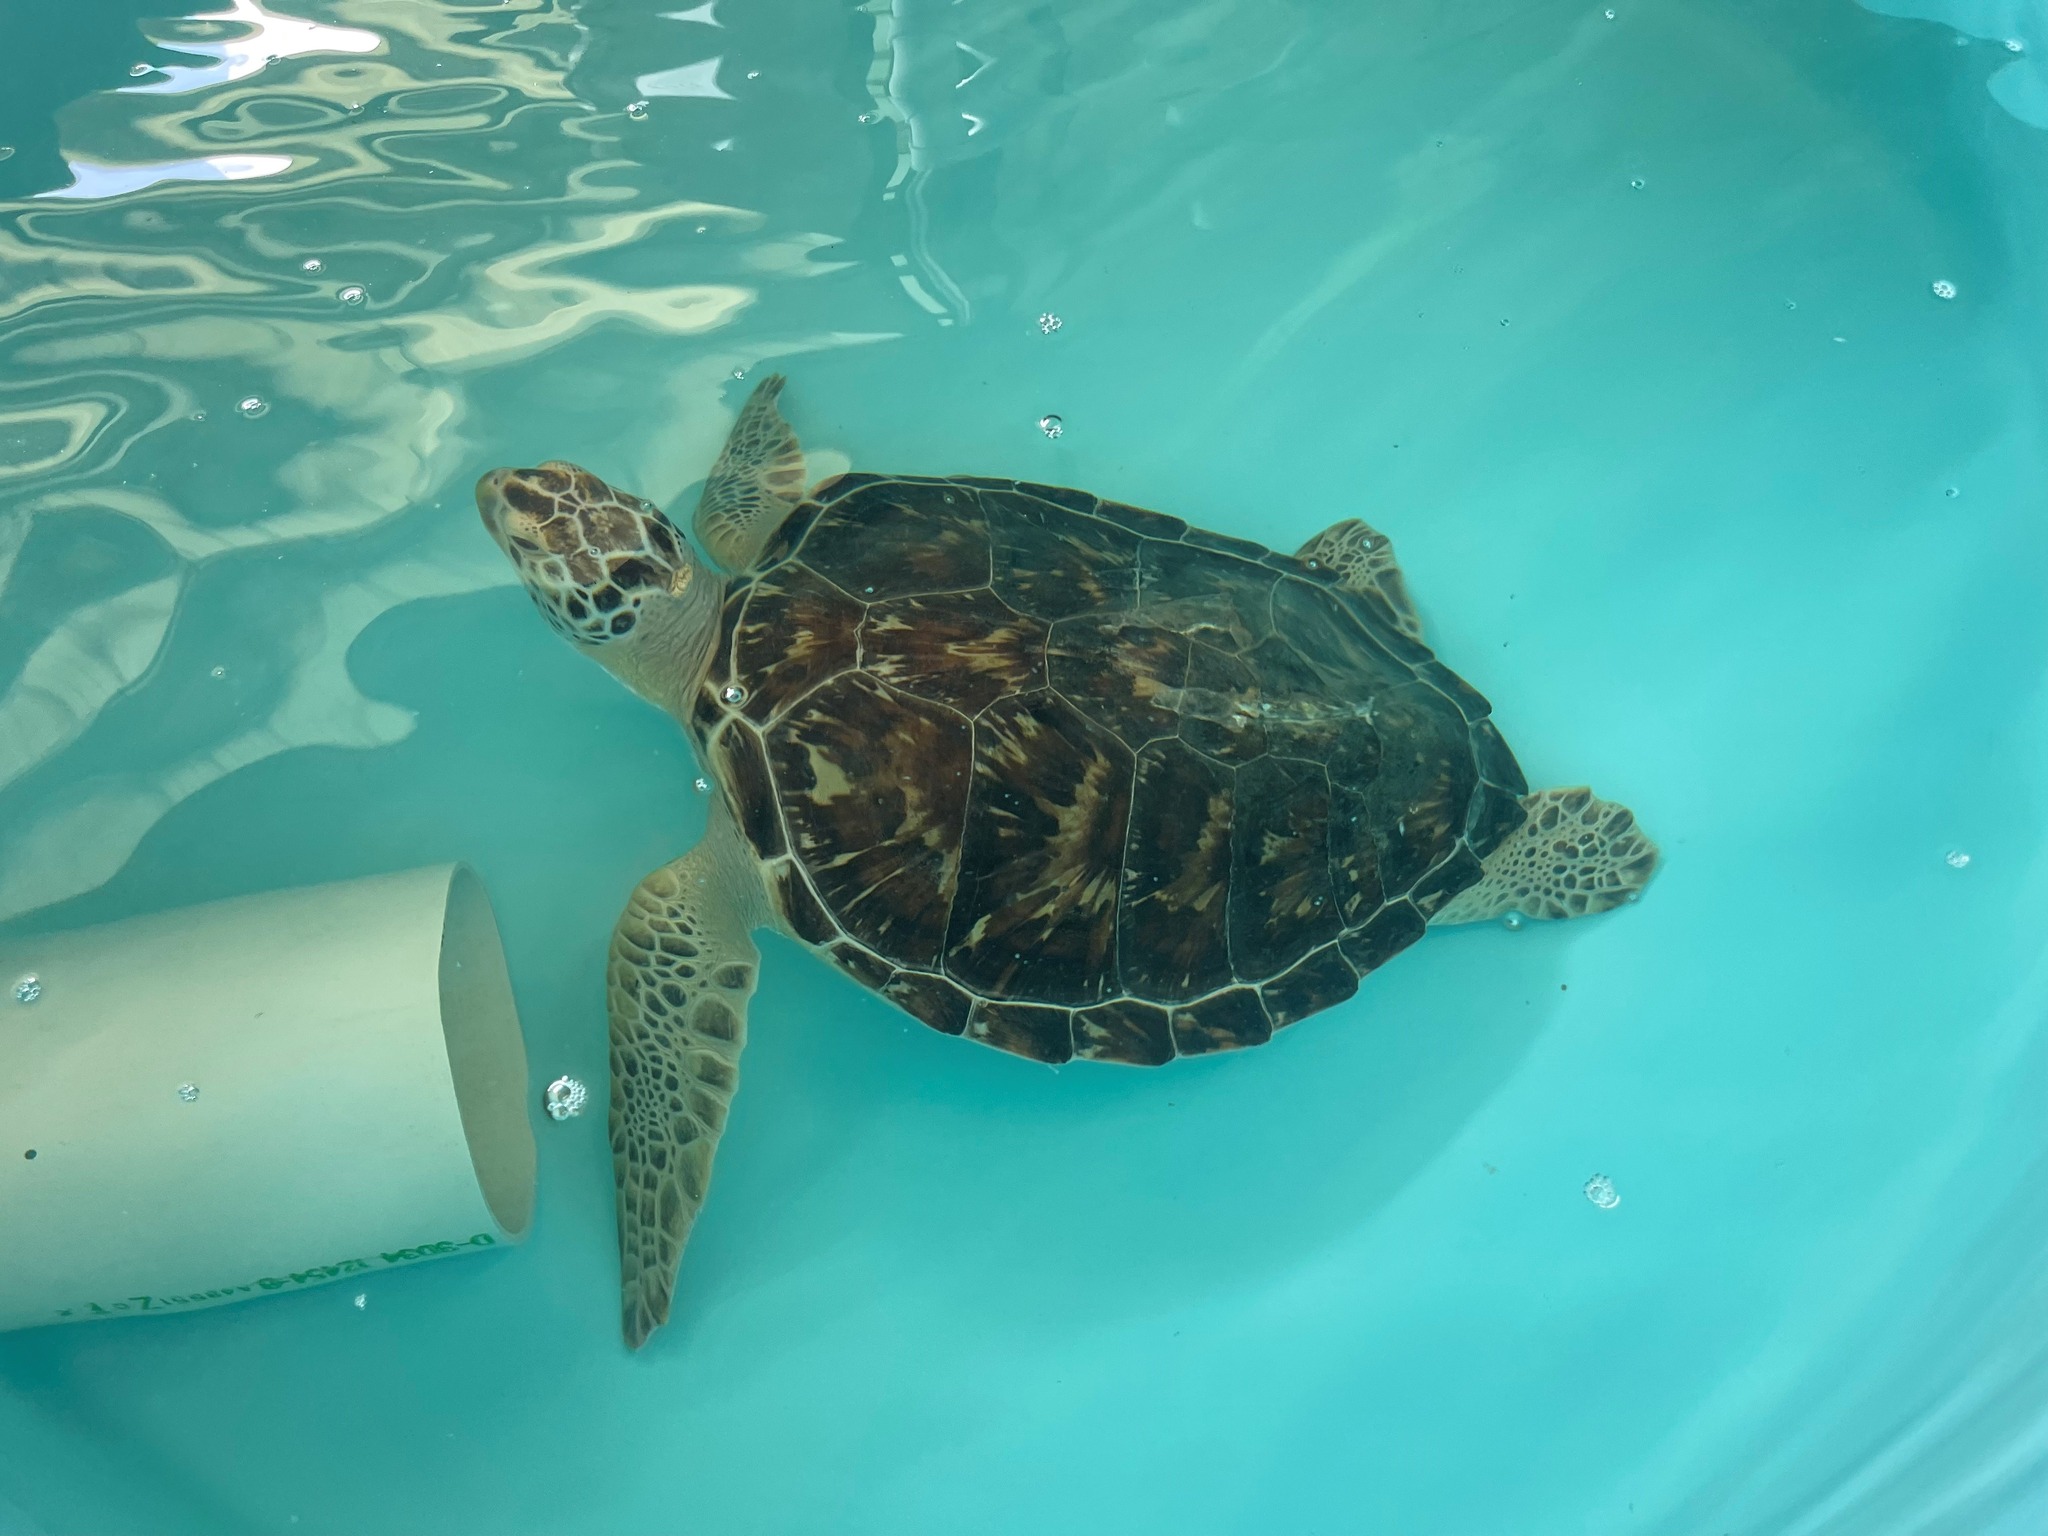 Photo of Slash the green sea turtle swimming in his tank at the Gulf Center for Sea Turtle Research